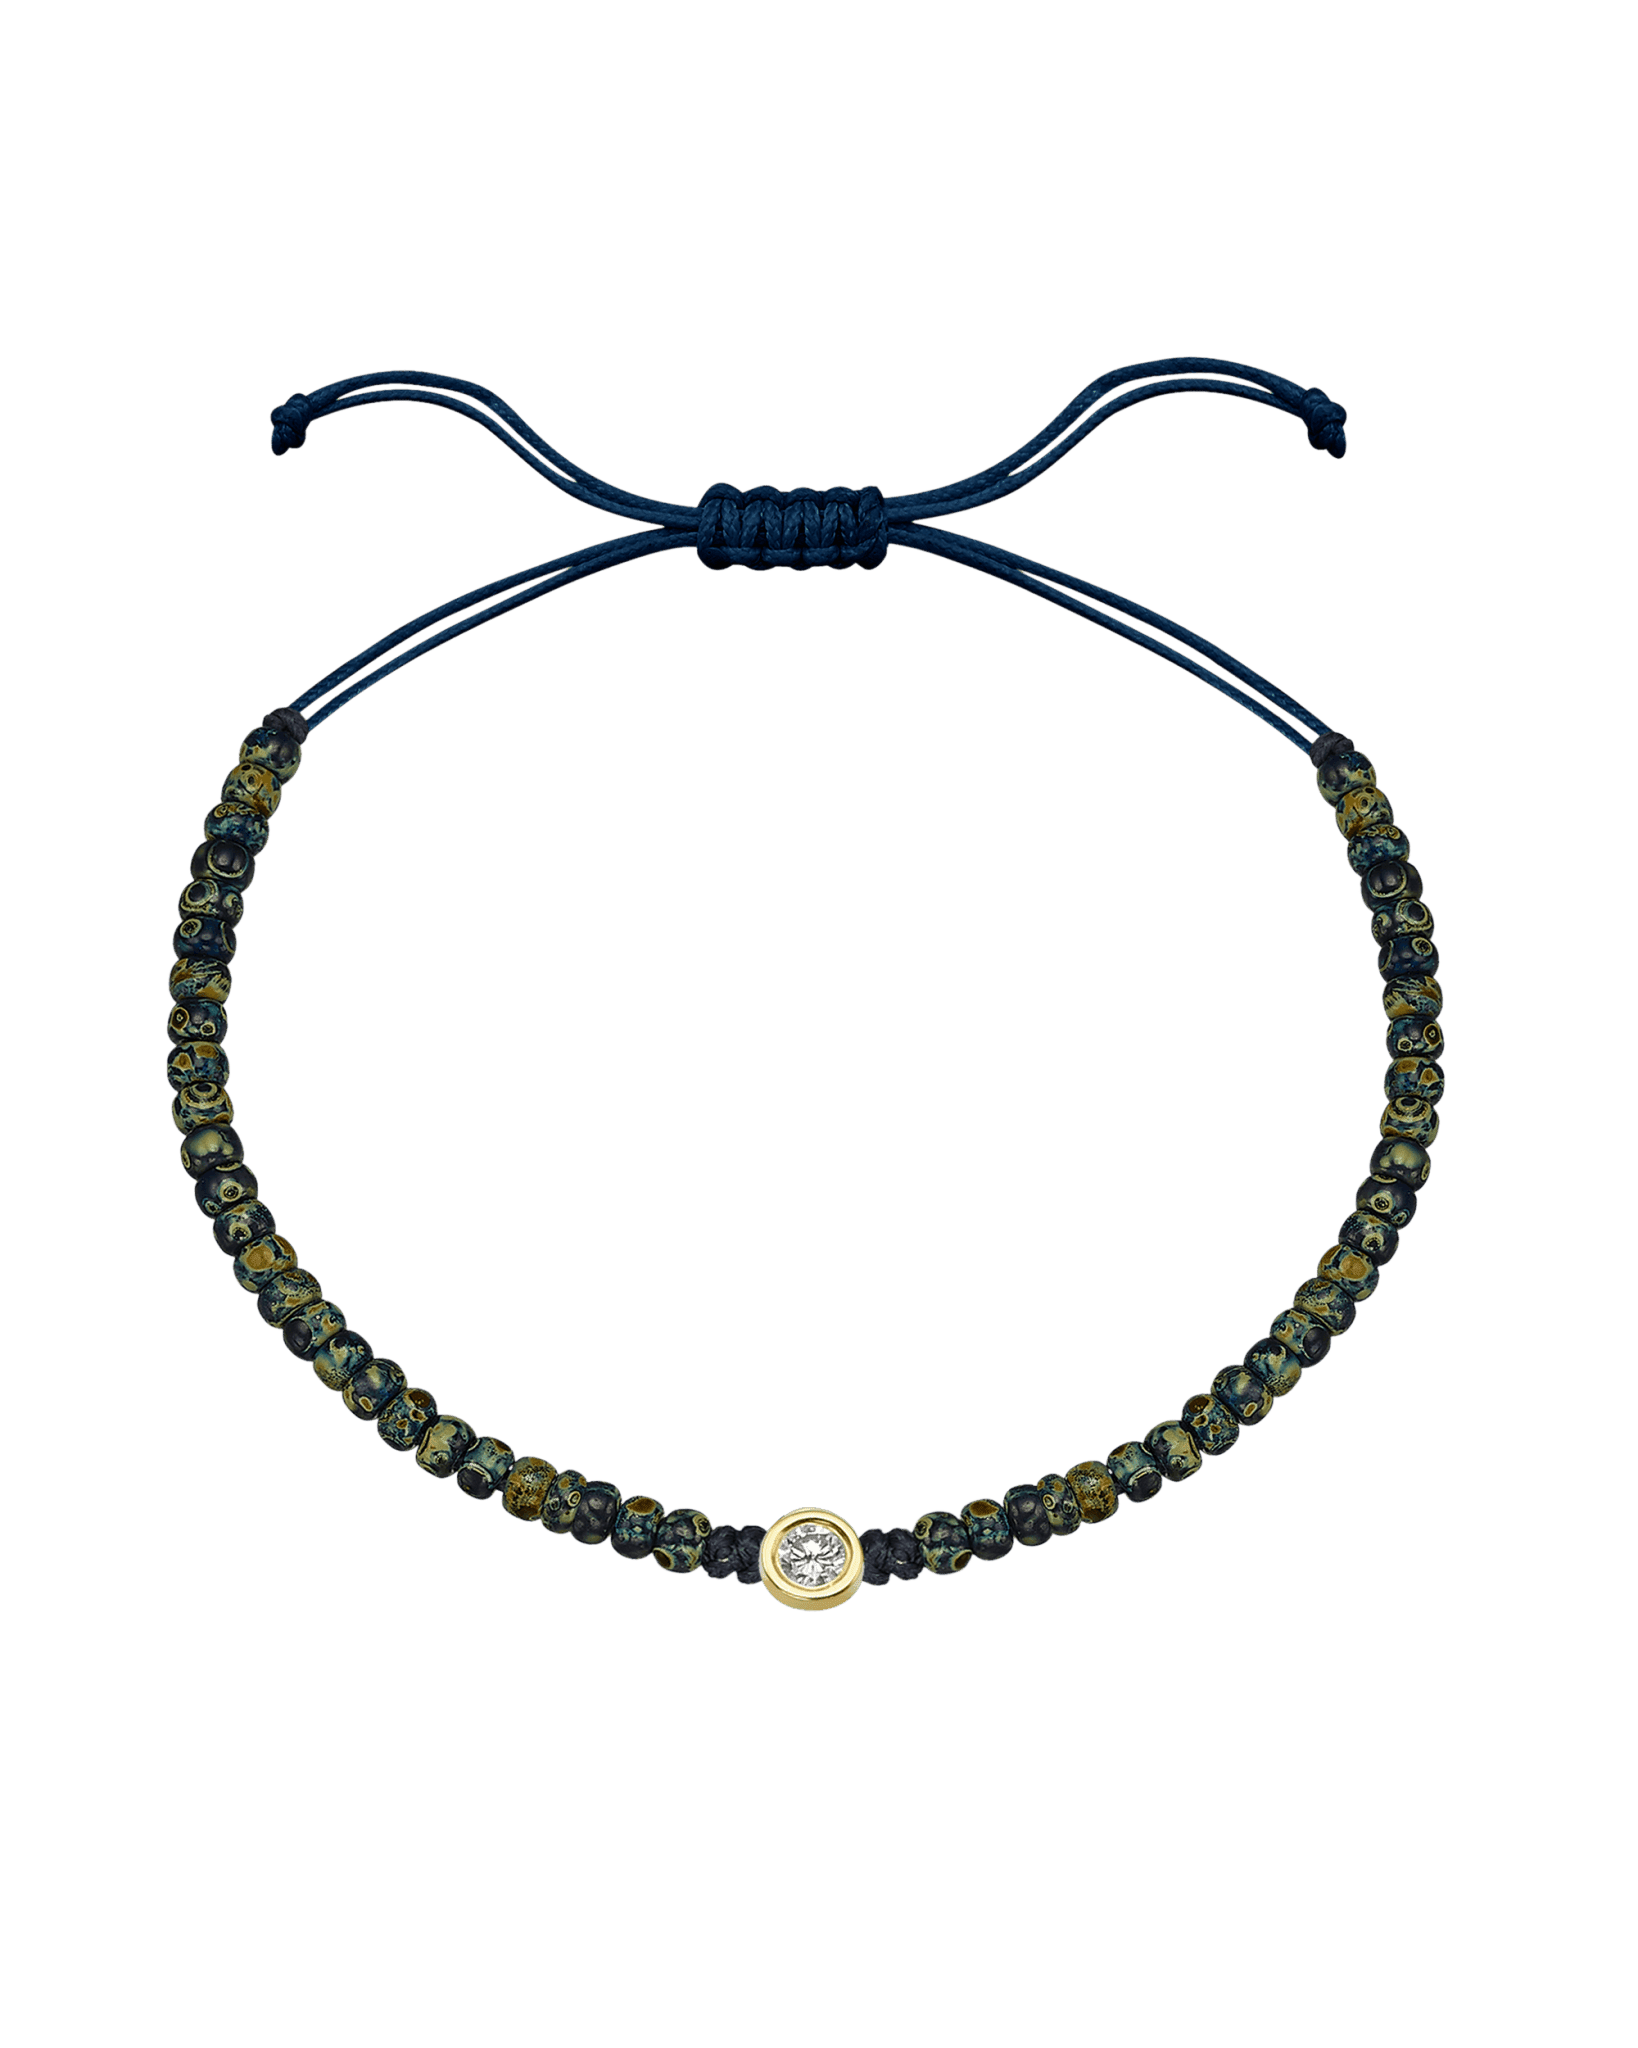 Dyed Blue Beads String Of Love - 14K Yellow Gold Bracelets magal-dev Large: 0.1ct 